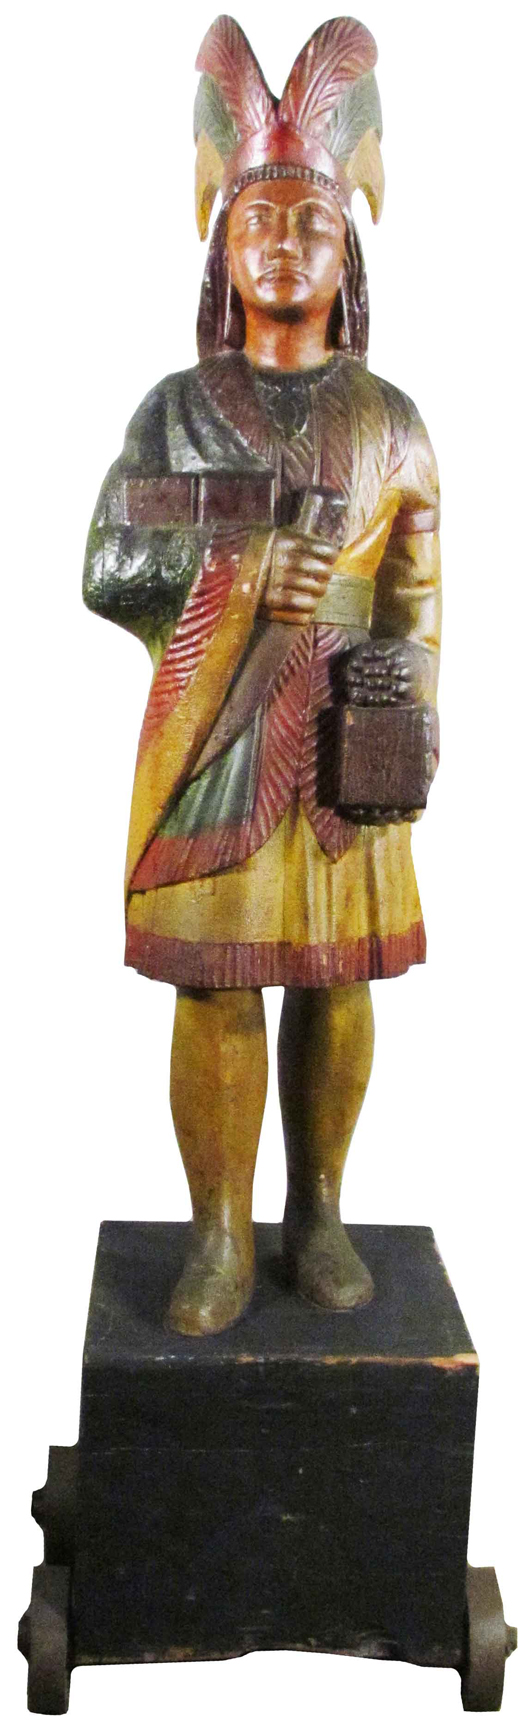 With its original paint intact, the 5-foot-tall Samuel Robb carved cigar store Indian achieved the auction's highest price, $94,400. Image courtesy Showtime Services.   